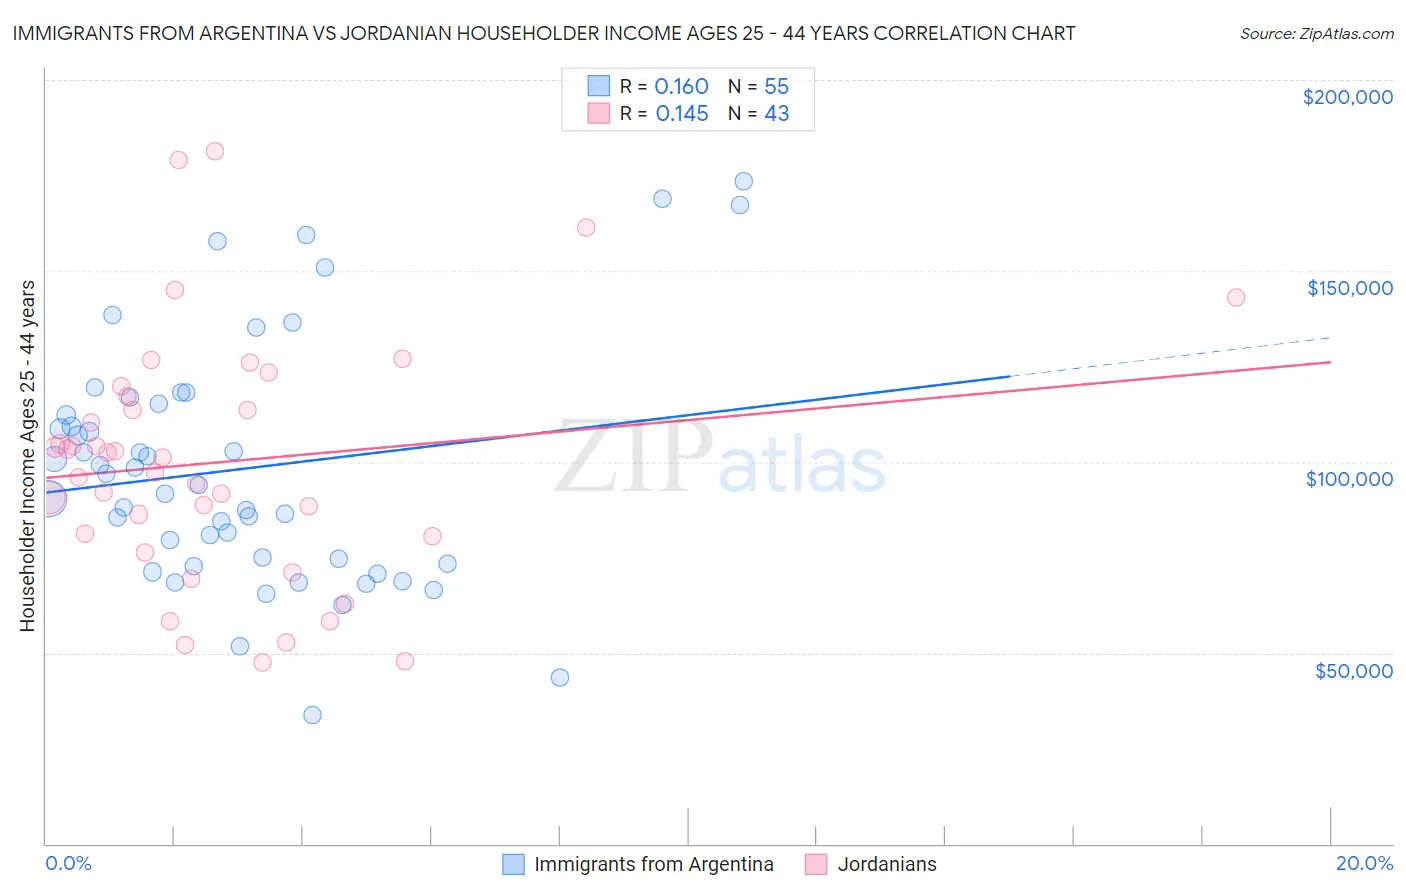 Immigrants from Argentina vs Jordanian Householder Income Ages 25 - 44 years